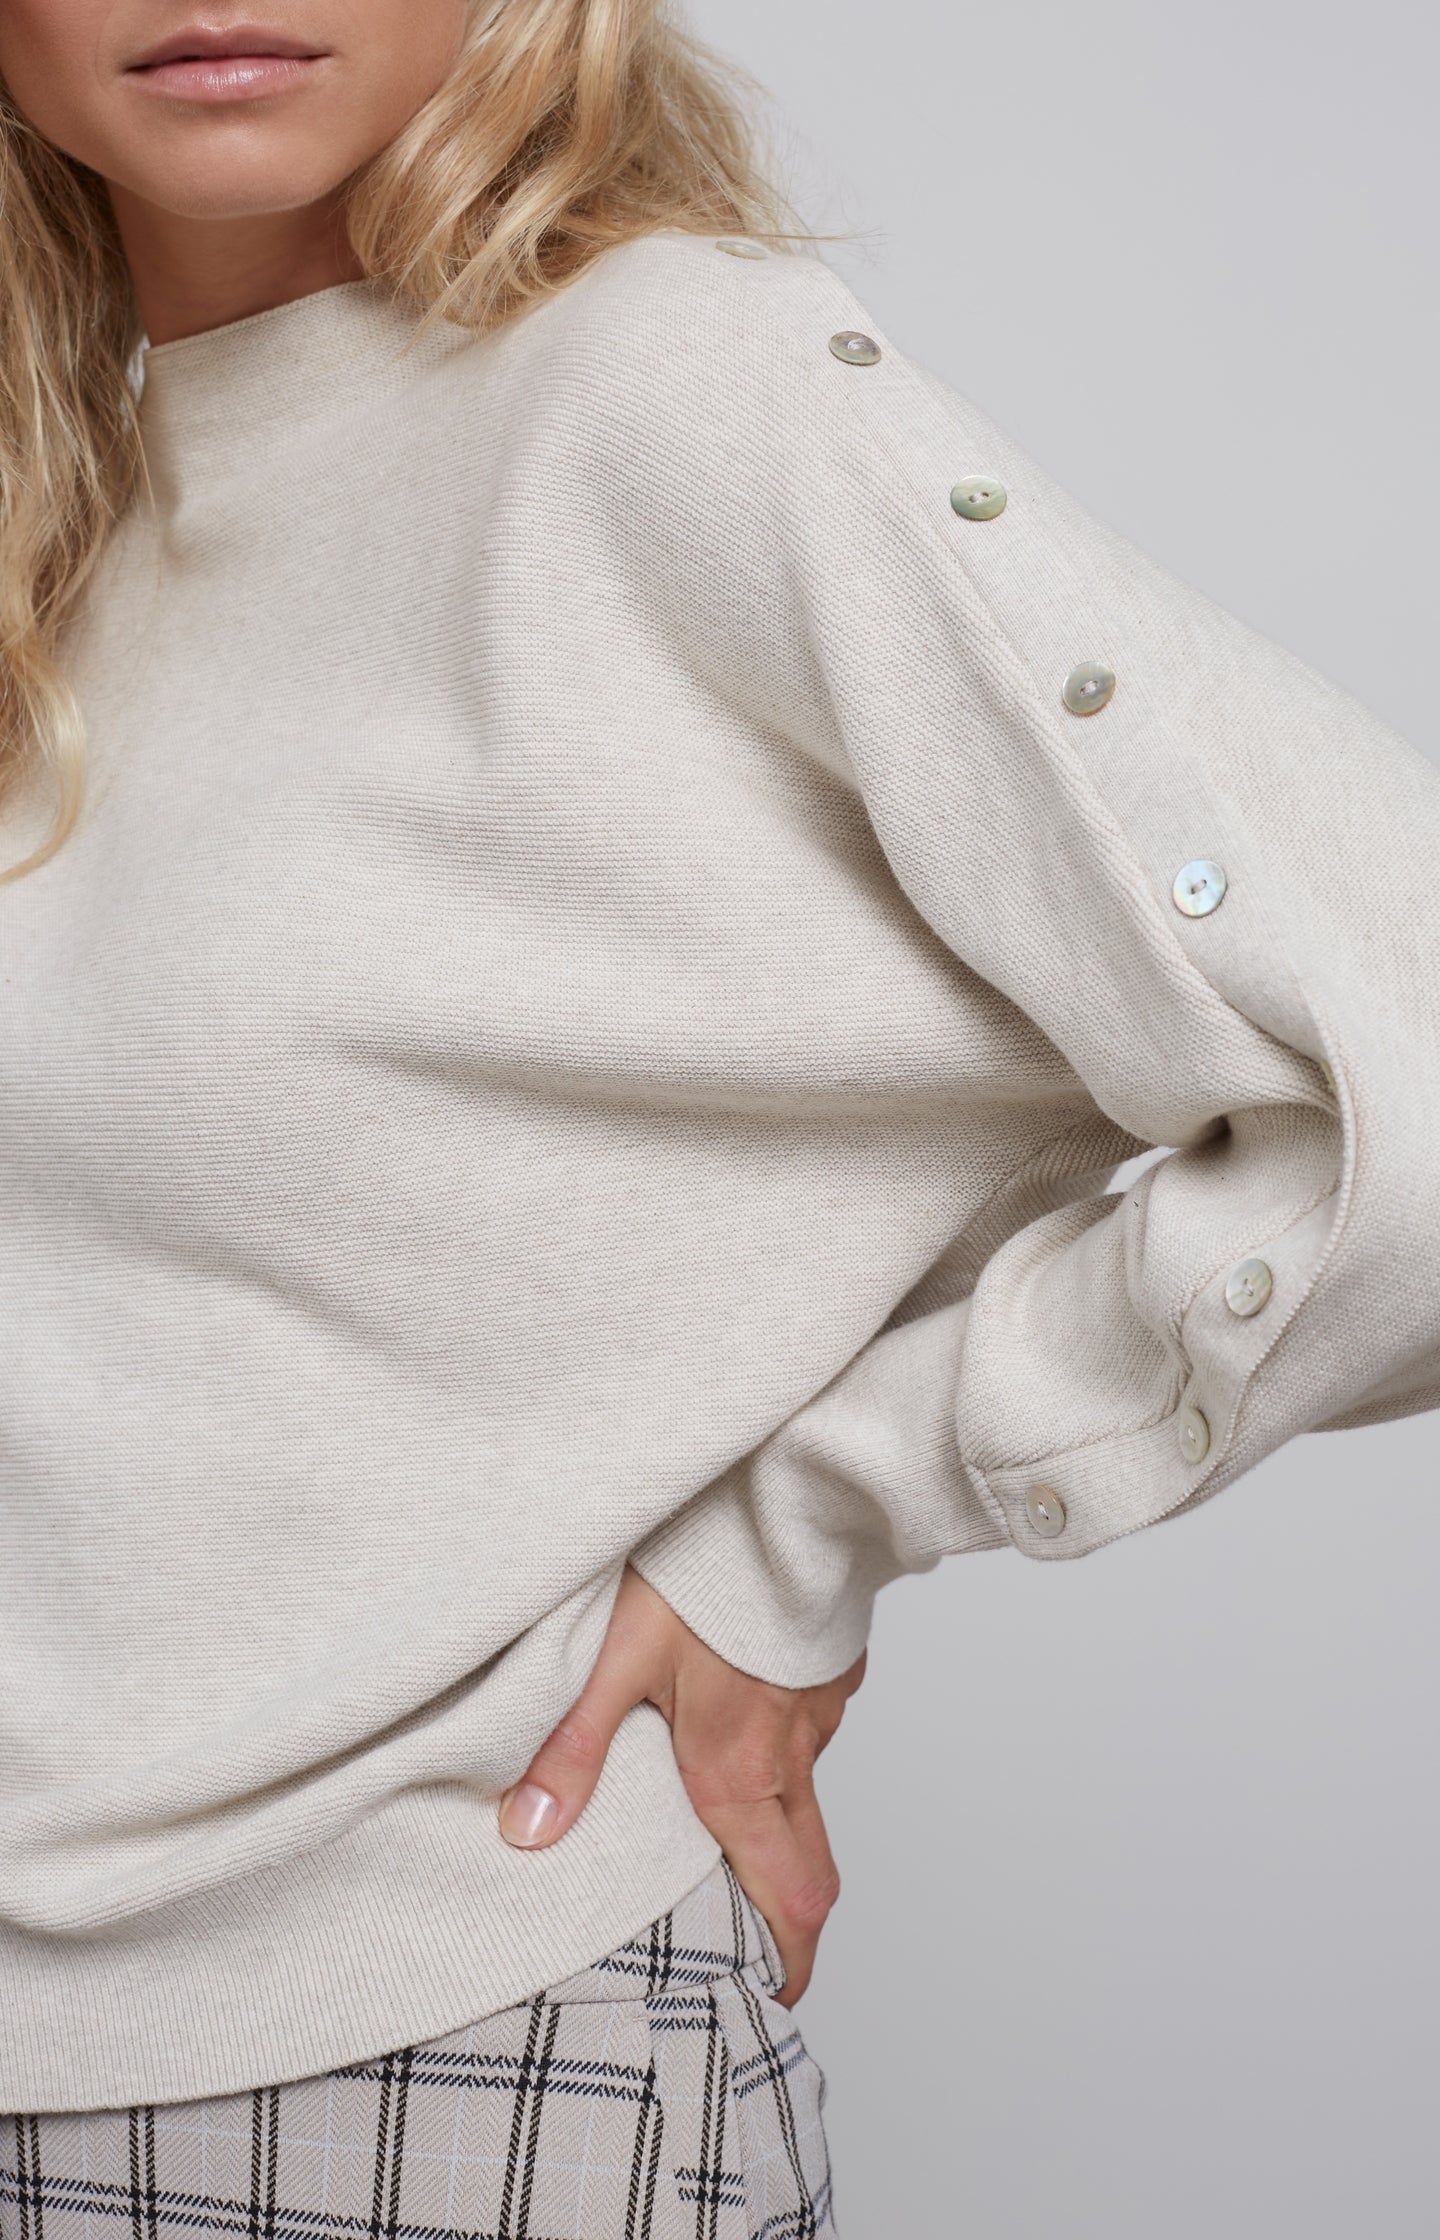 Sweater with round neck, long sleeves and buttons details